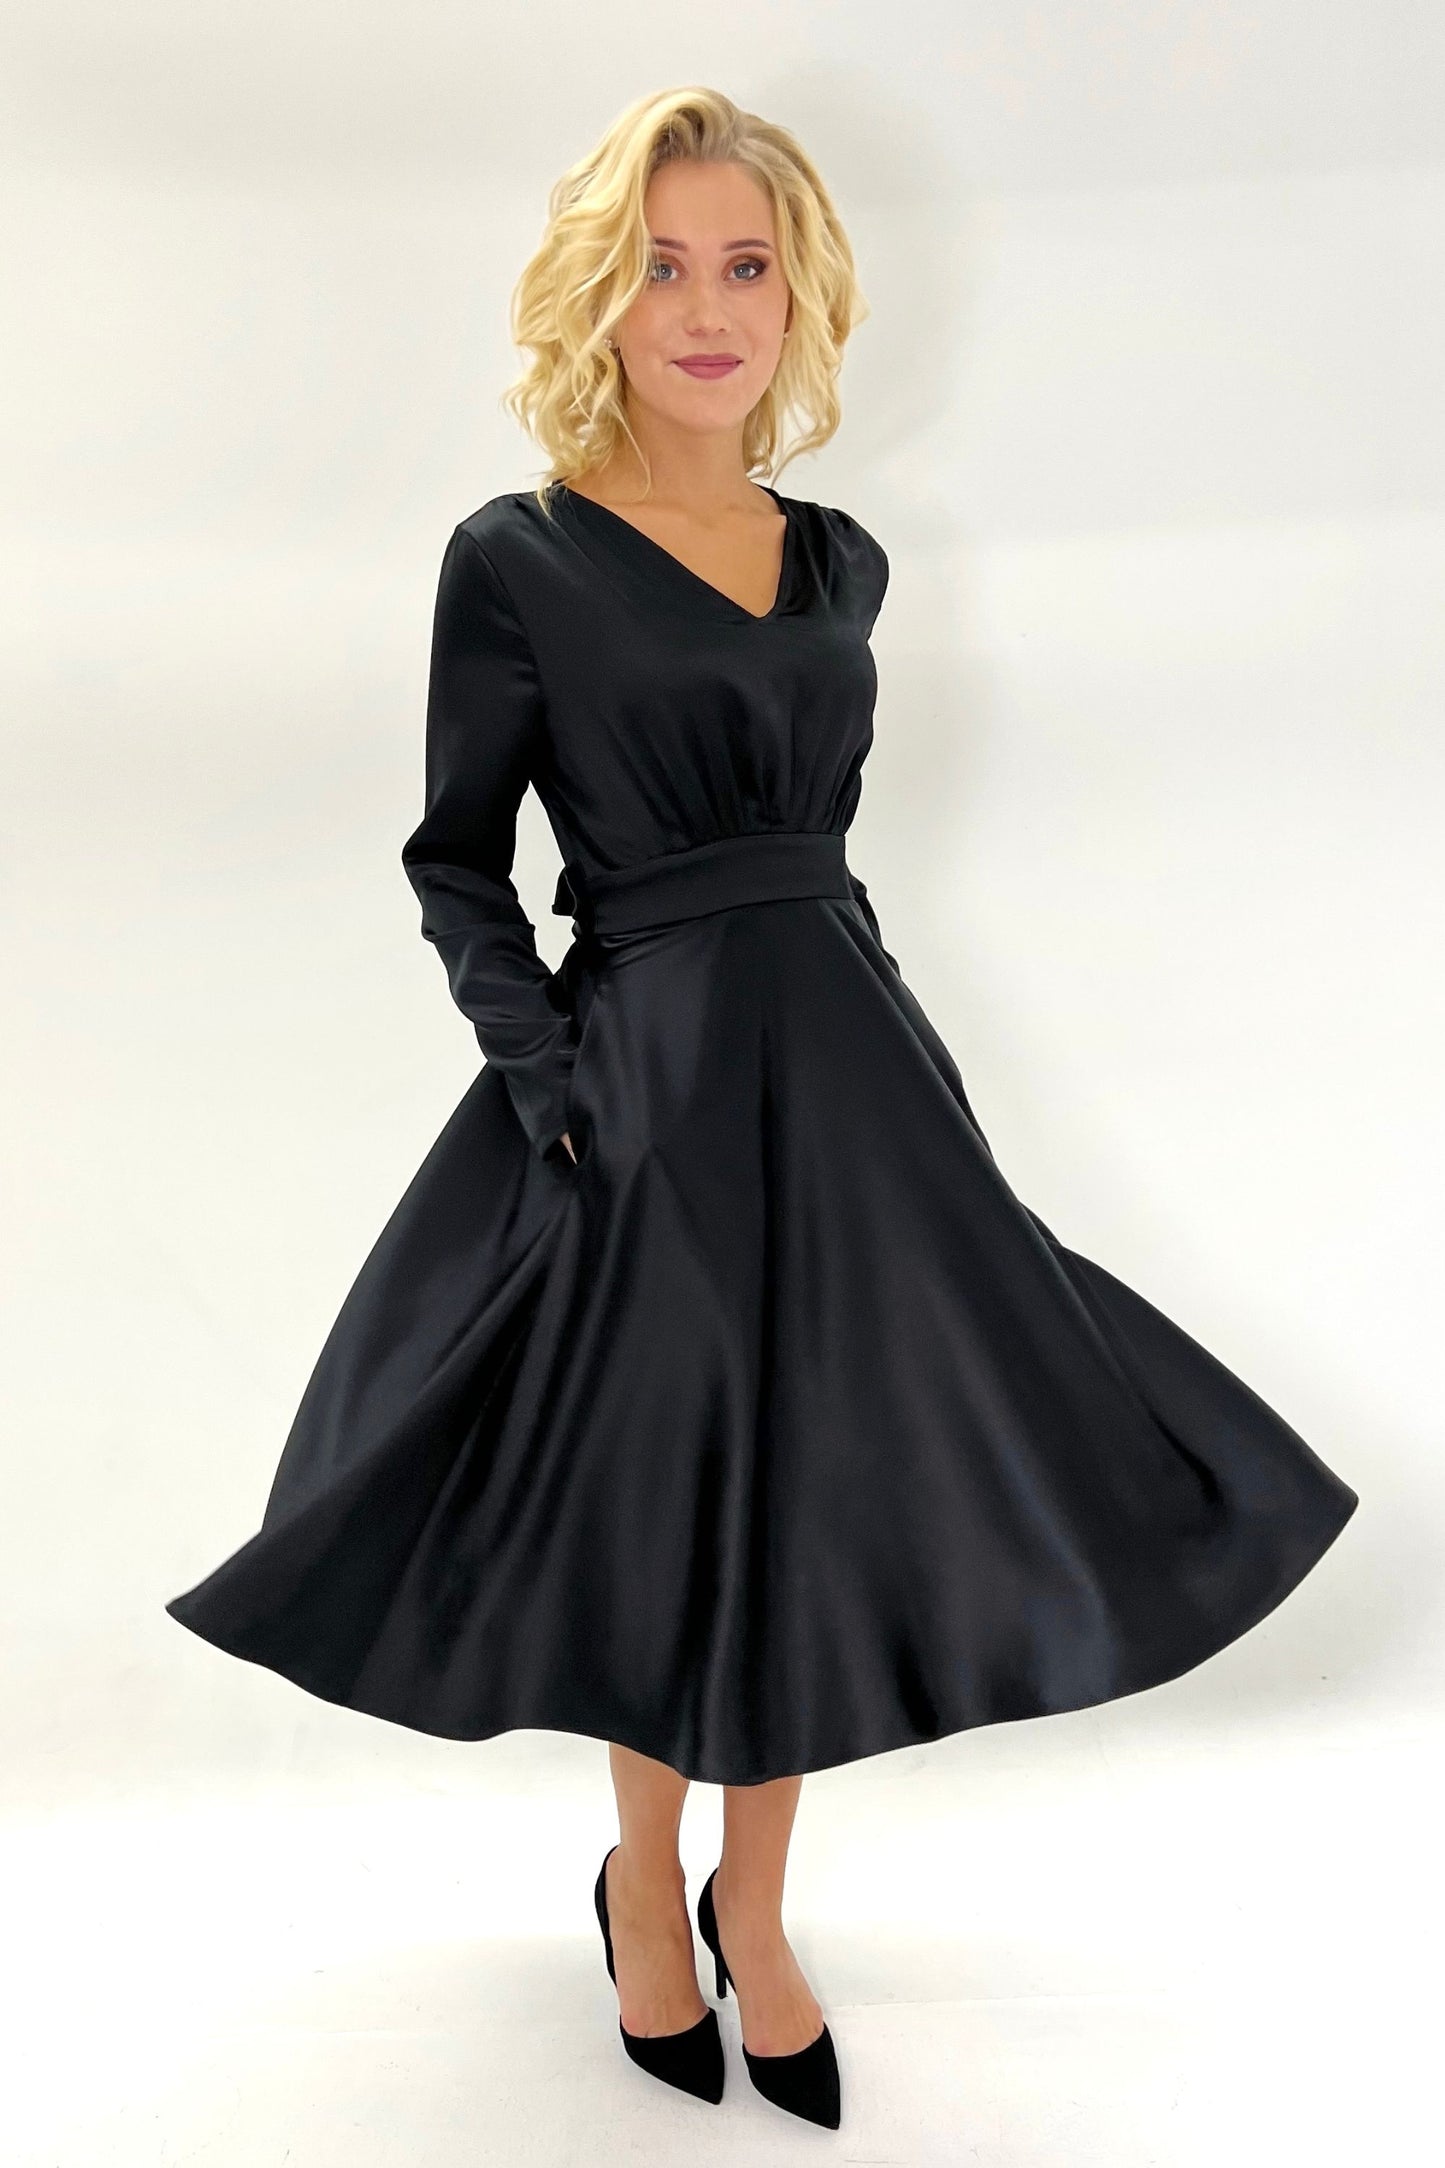 Black cocktail dress with sleeves